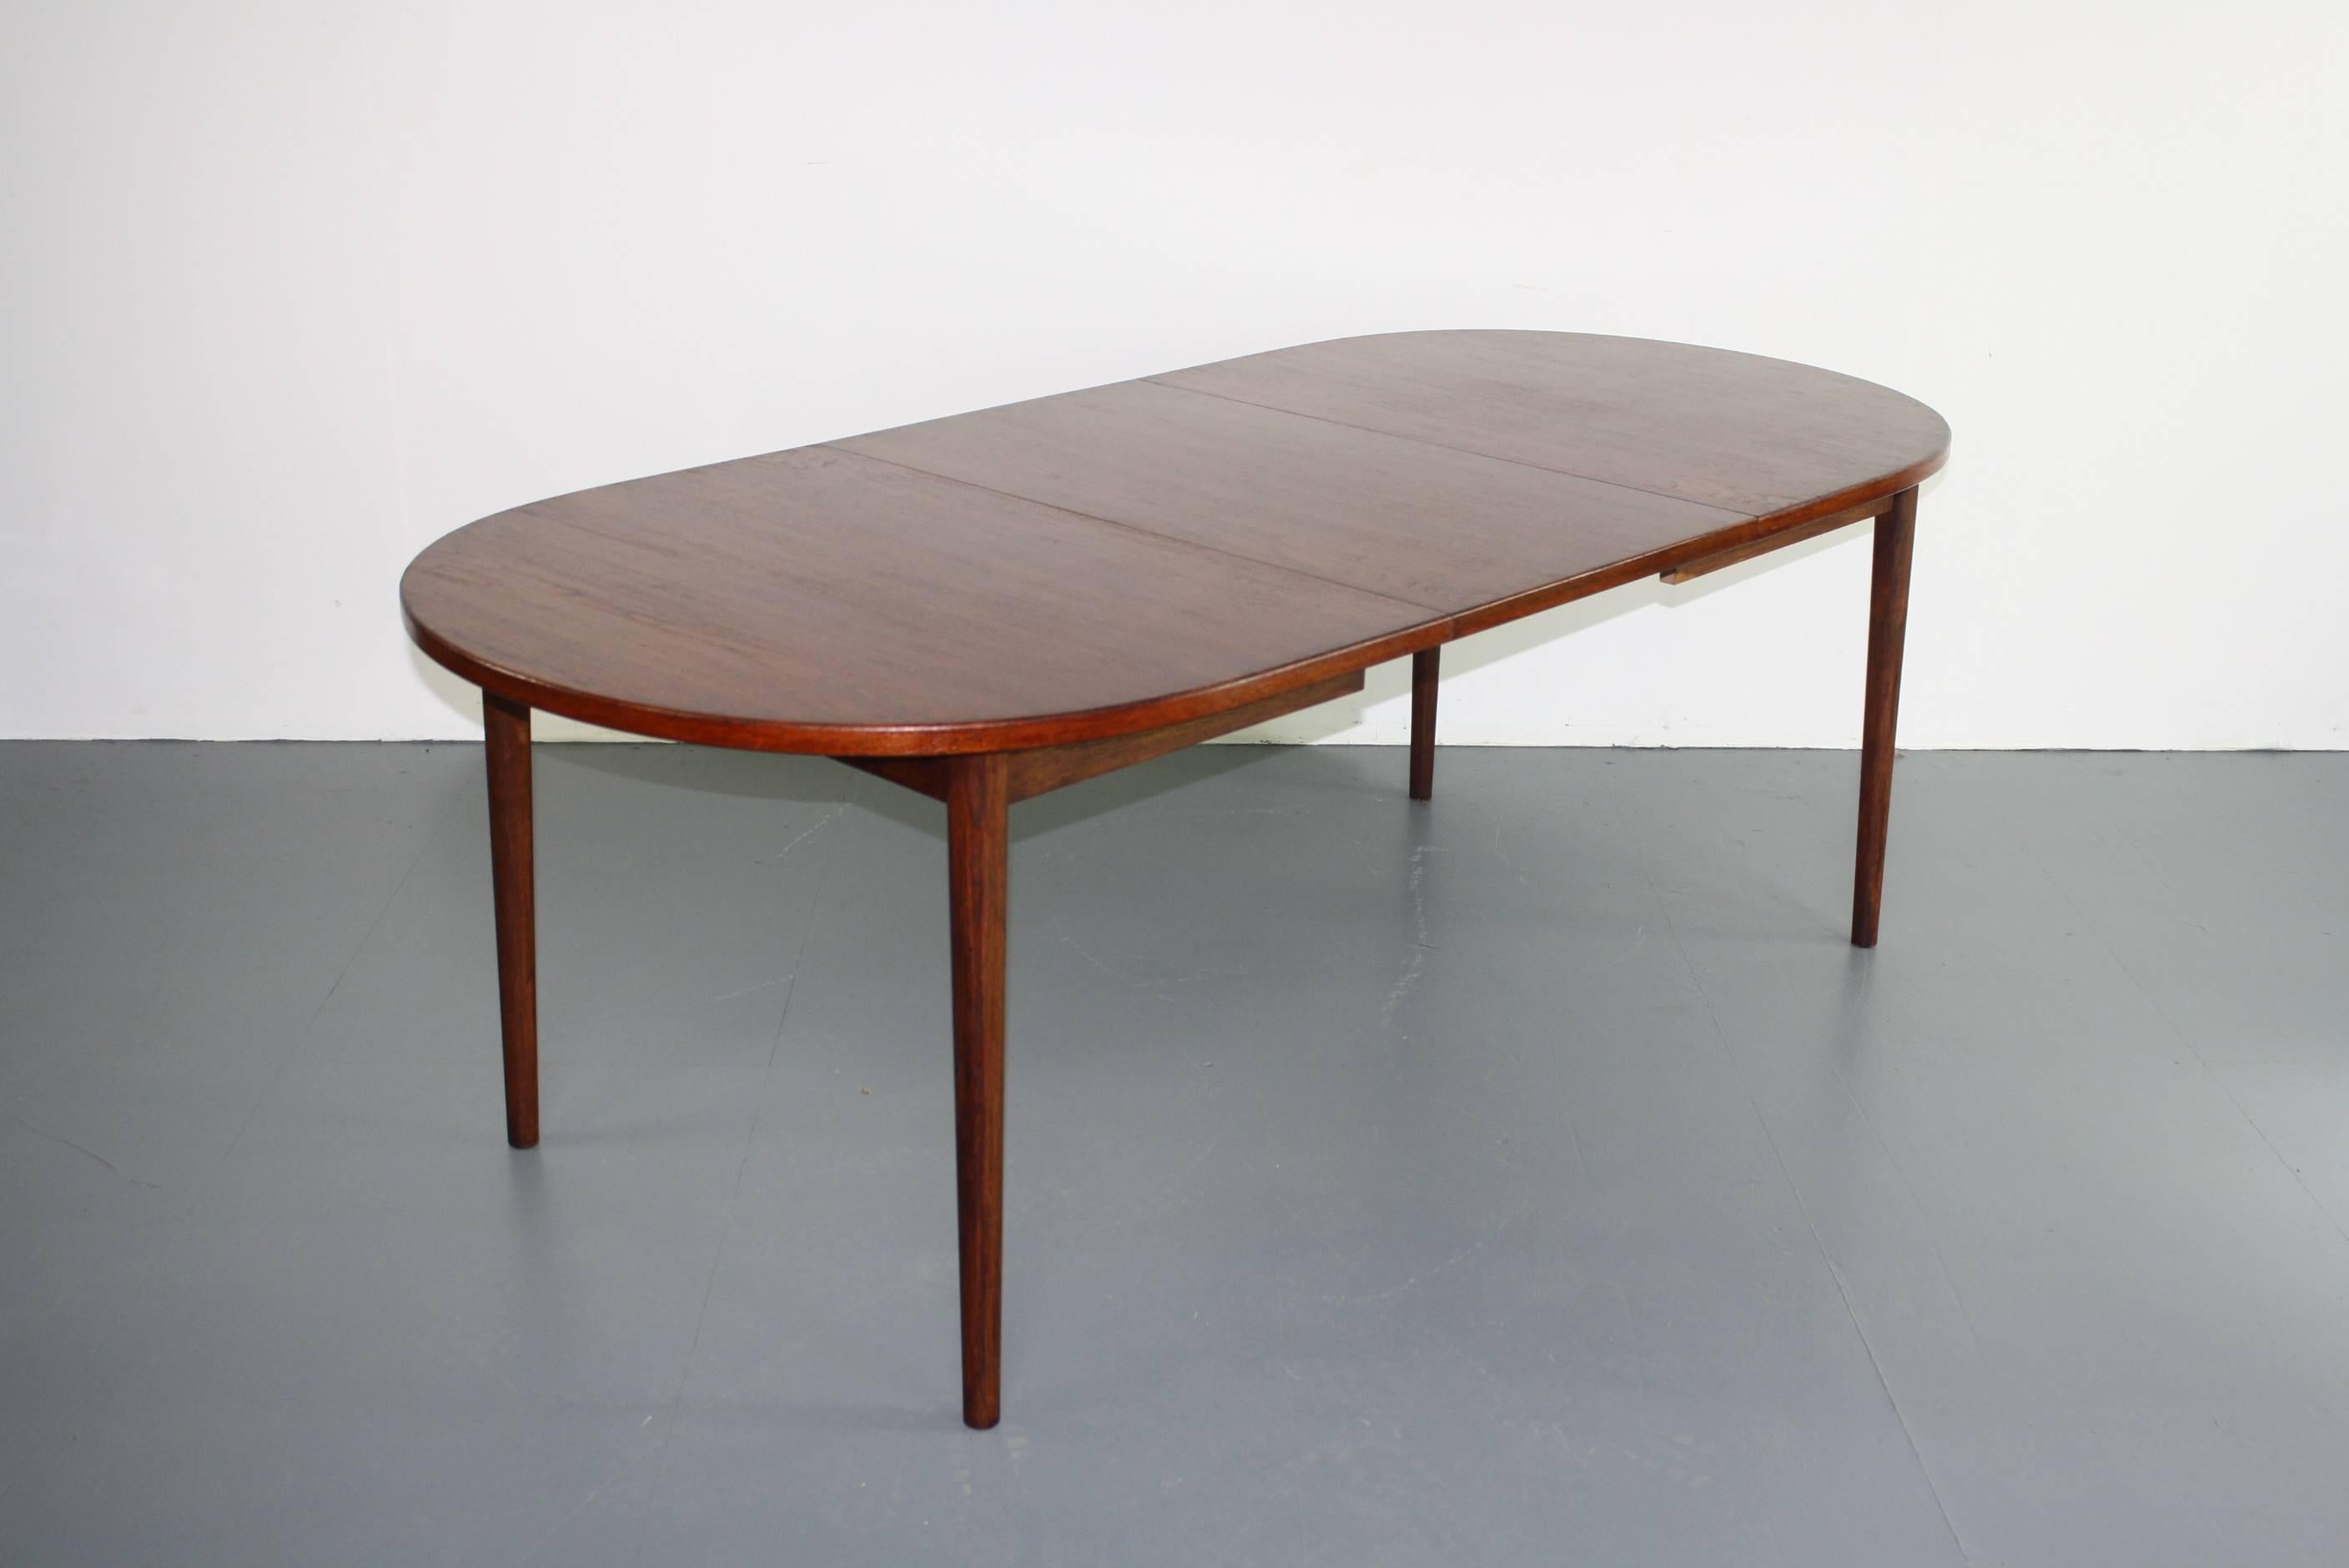 Really lovely 1960s-1970s extending teak dining table designed by Nils Jonsson for Troeds of Sweden. The table has two removable leaves that can be stored directly underneath, meaning that it can be three lengths, seating a maximum of ten